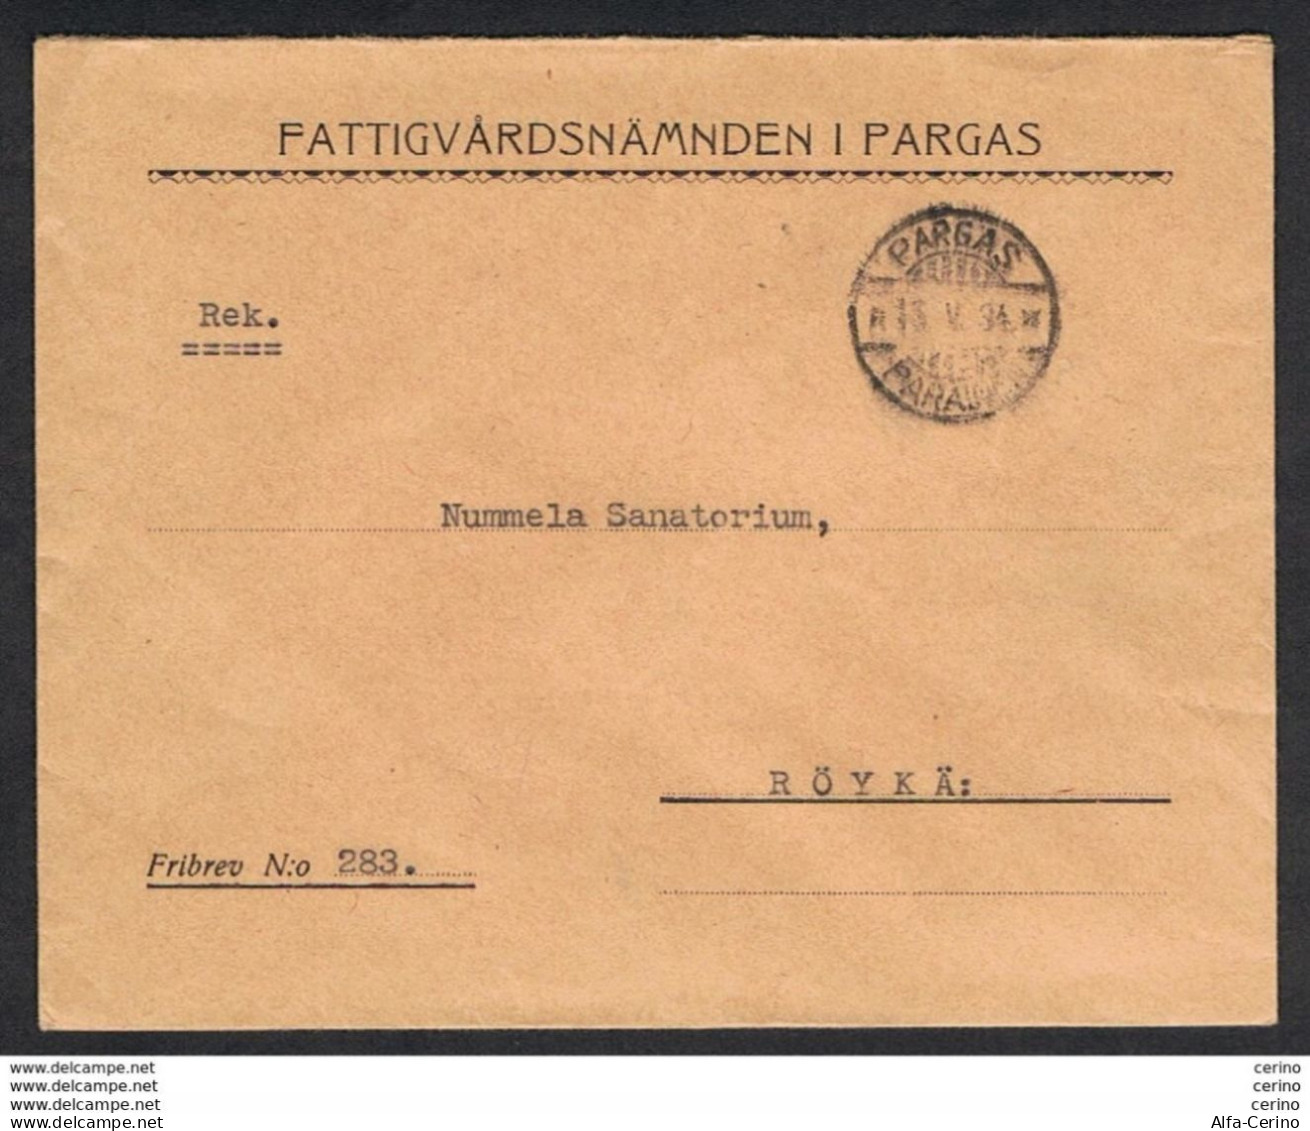 FINLAND: 1934  FREE POSTMARK ON COVERT FROM PARGAS - FATTIGVARDSNAMNDEN I ... TO ROYKA - Covers & Documents